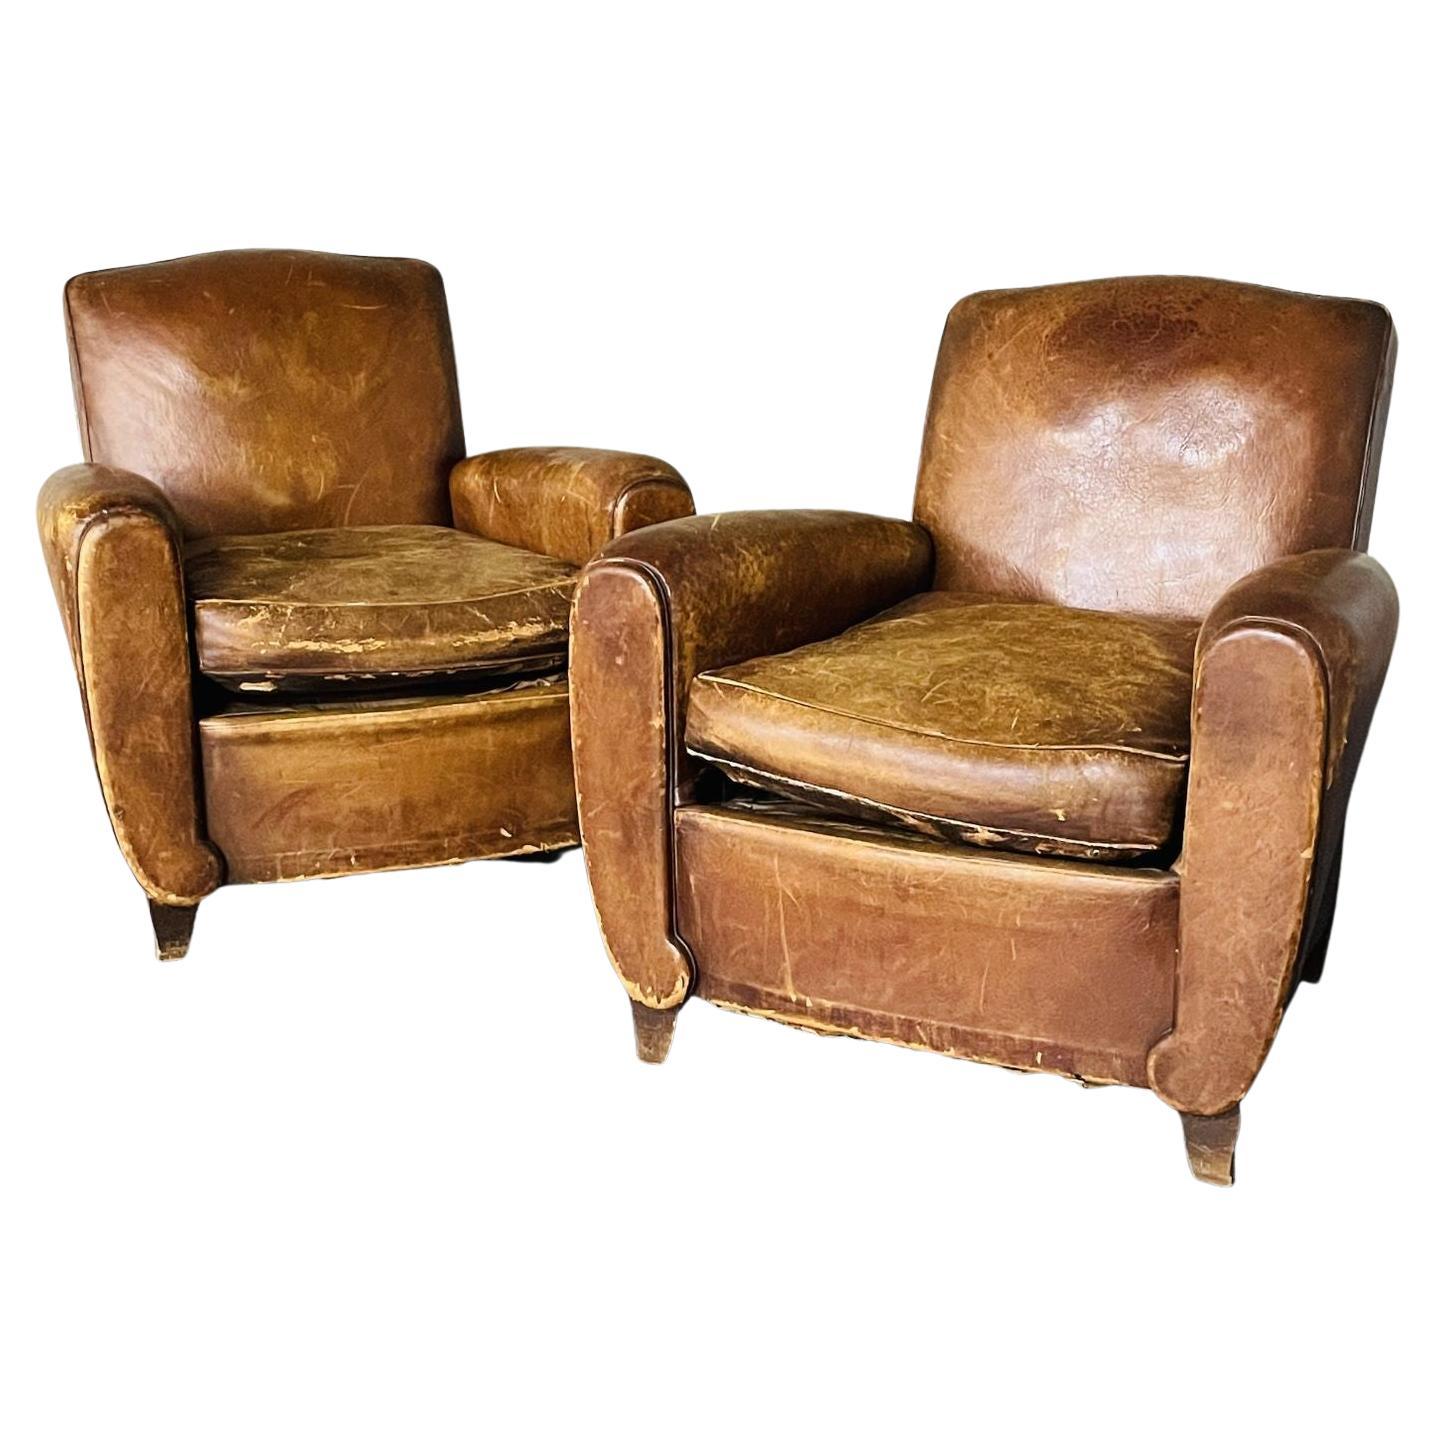 Pair of French Art Deco Distressed Leather Club / Lounge Chairs, Patinated